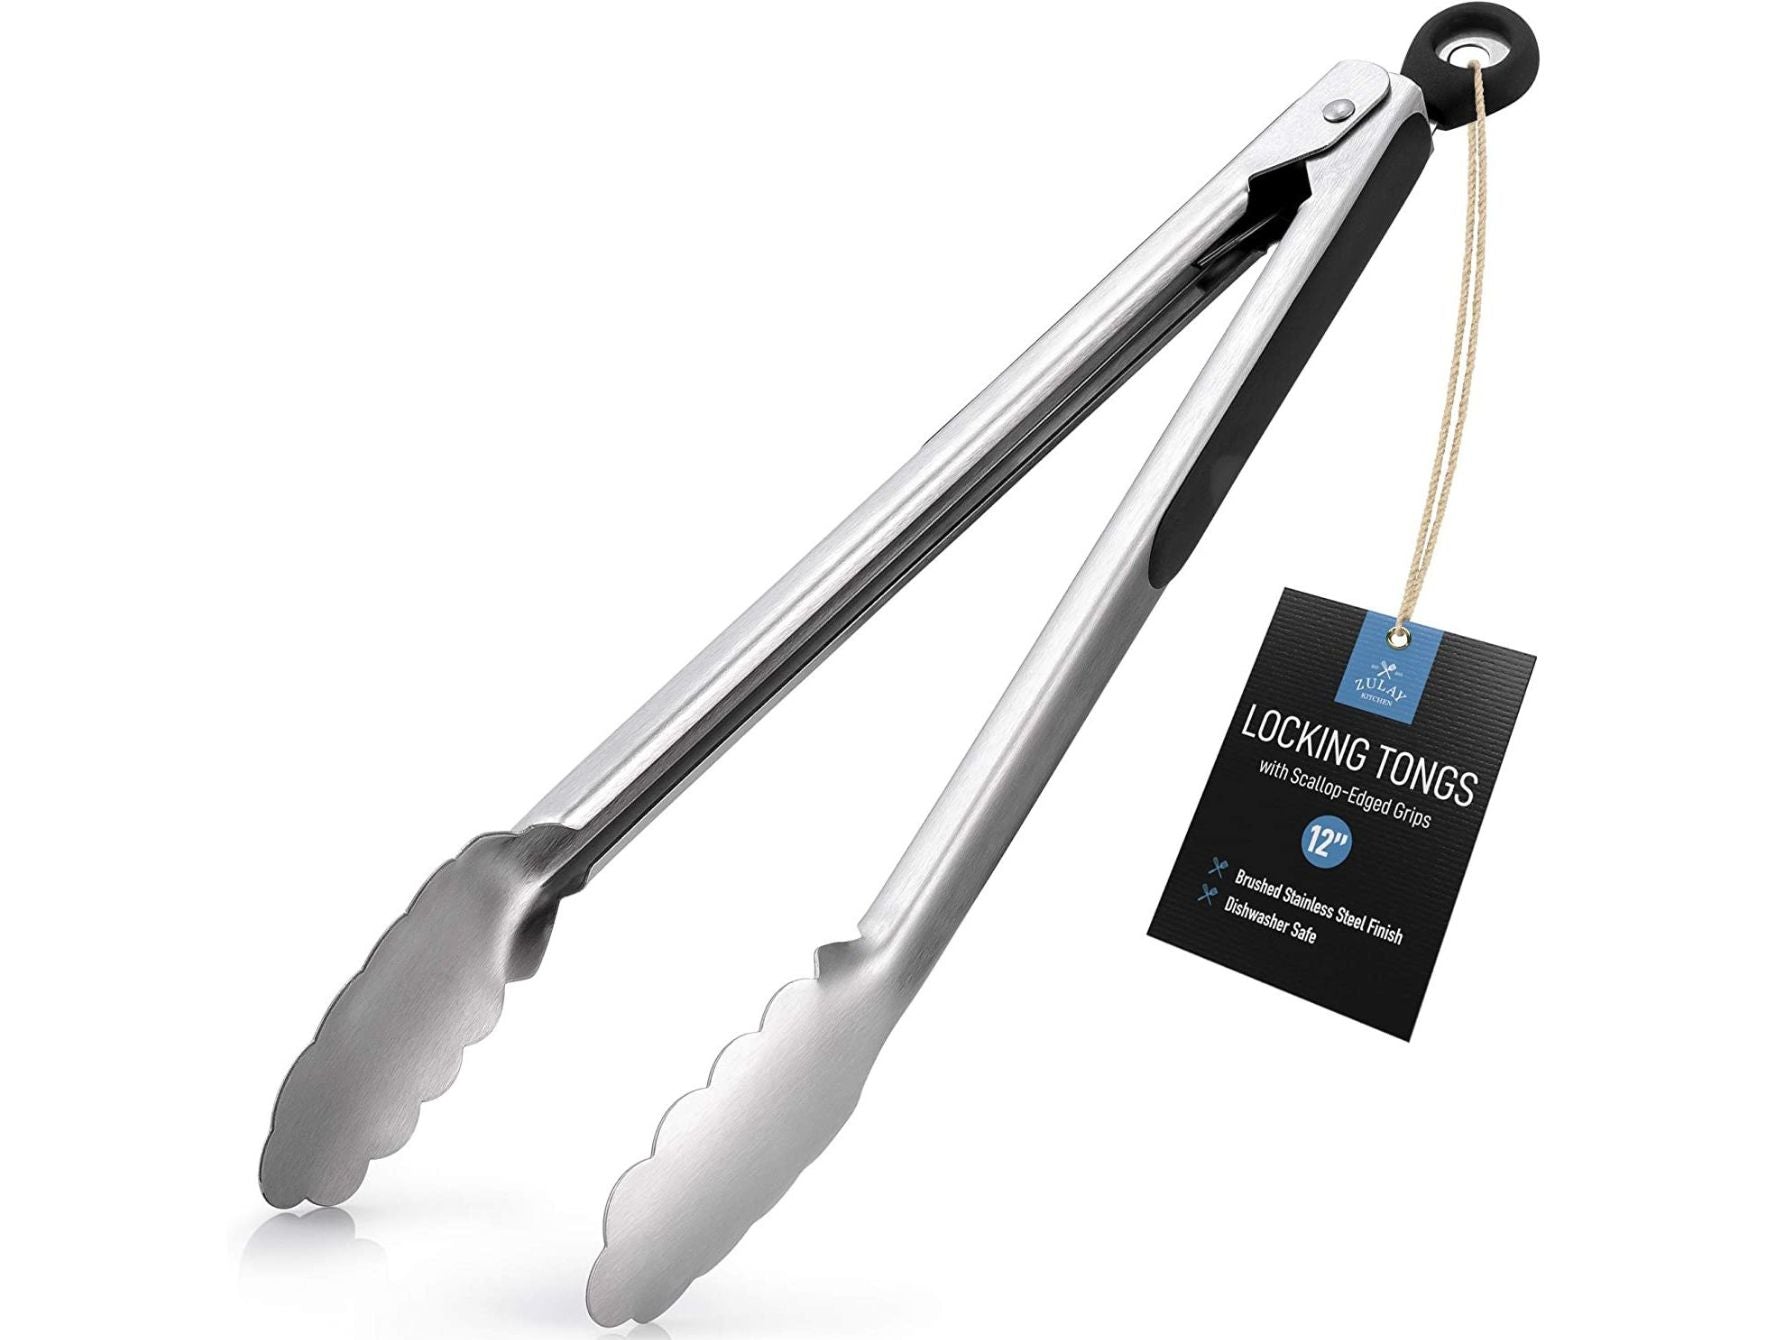 Save on ChefSelect Tongs 12 Inch Order Online Delivery